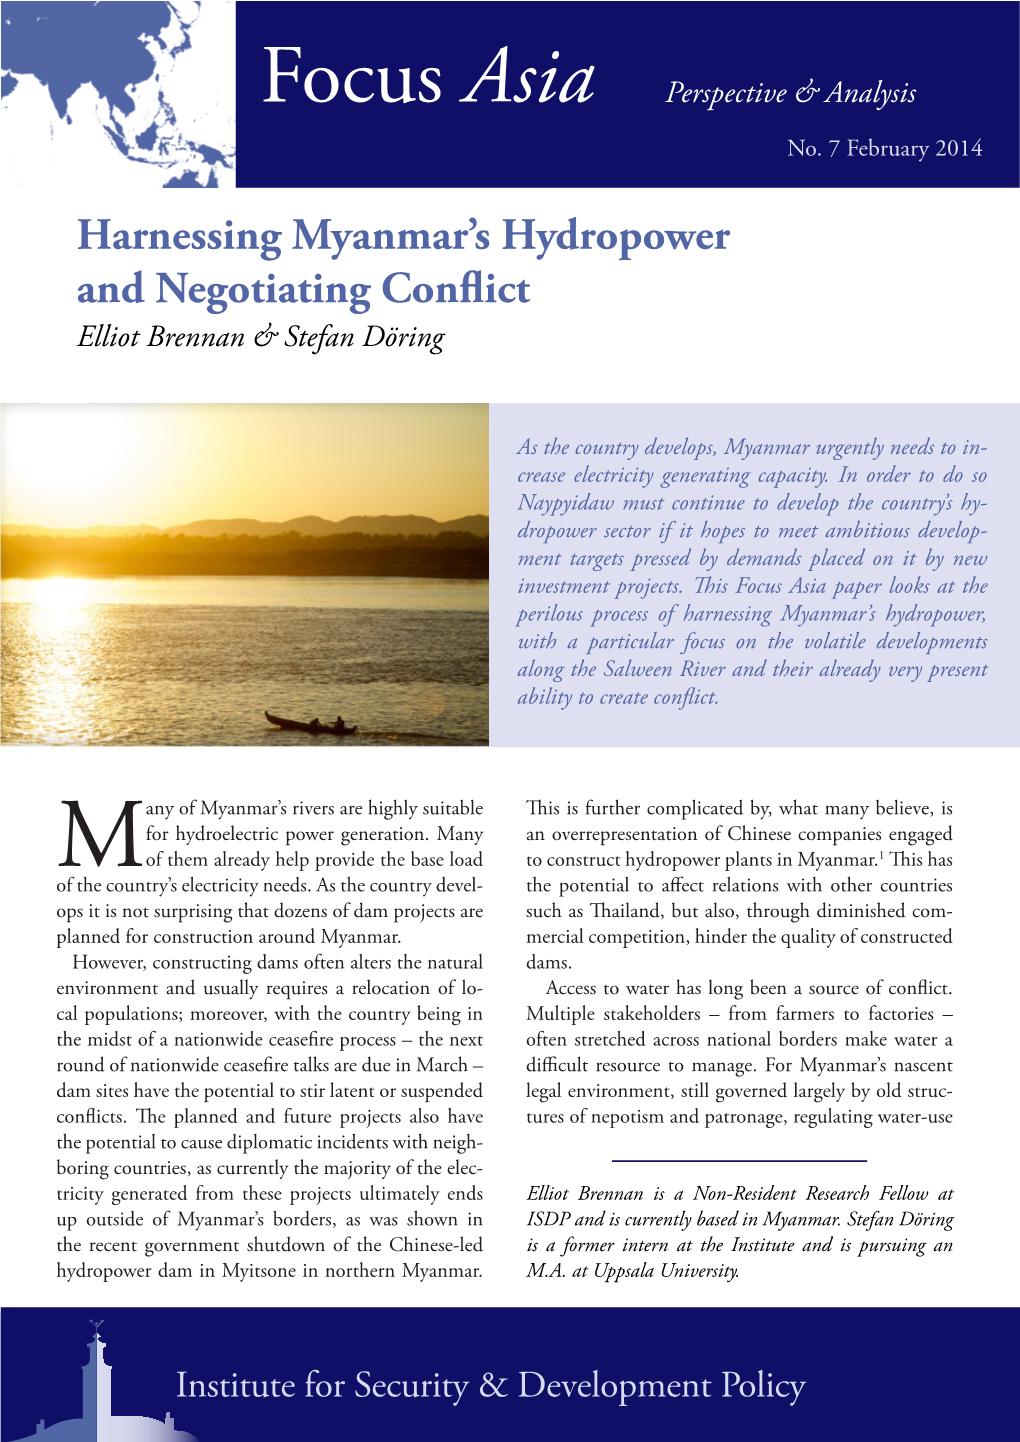 Harnessing Myanmar's Hydropower and Negotiating Conflict